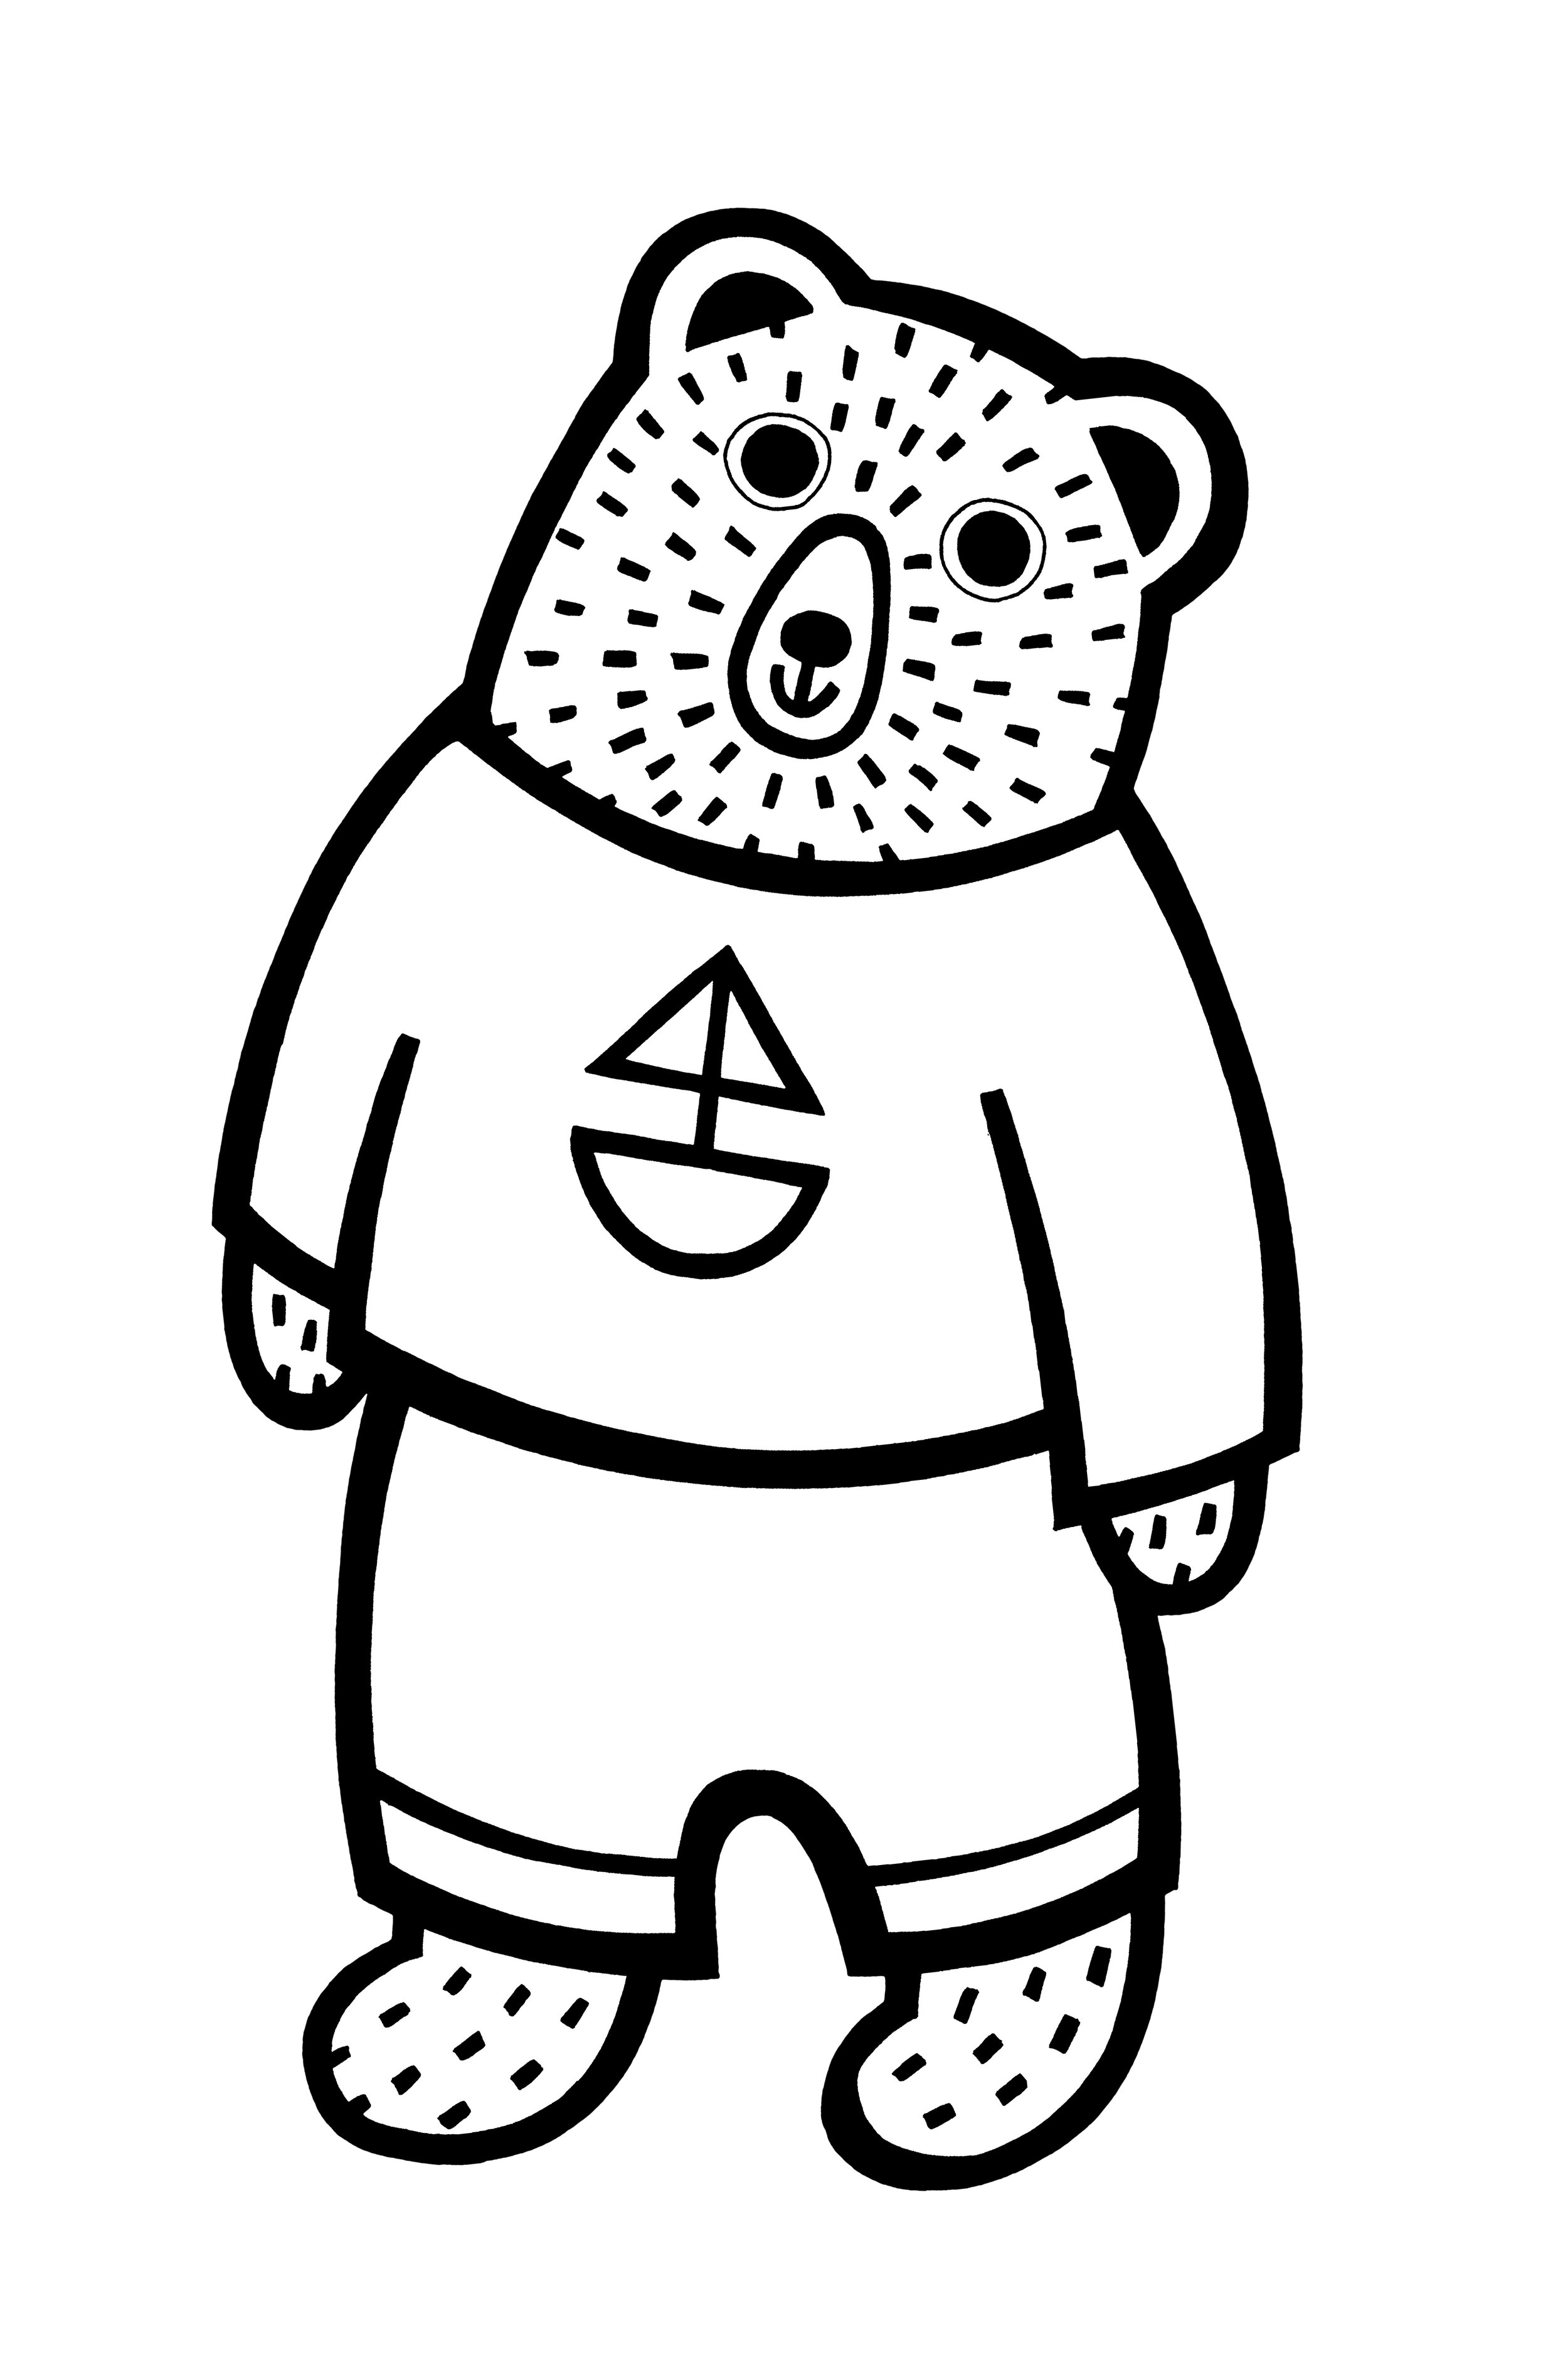 Bear with boat top.jpg